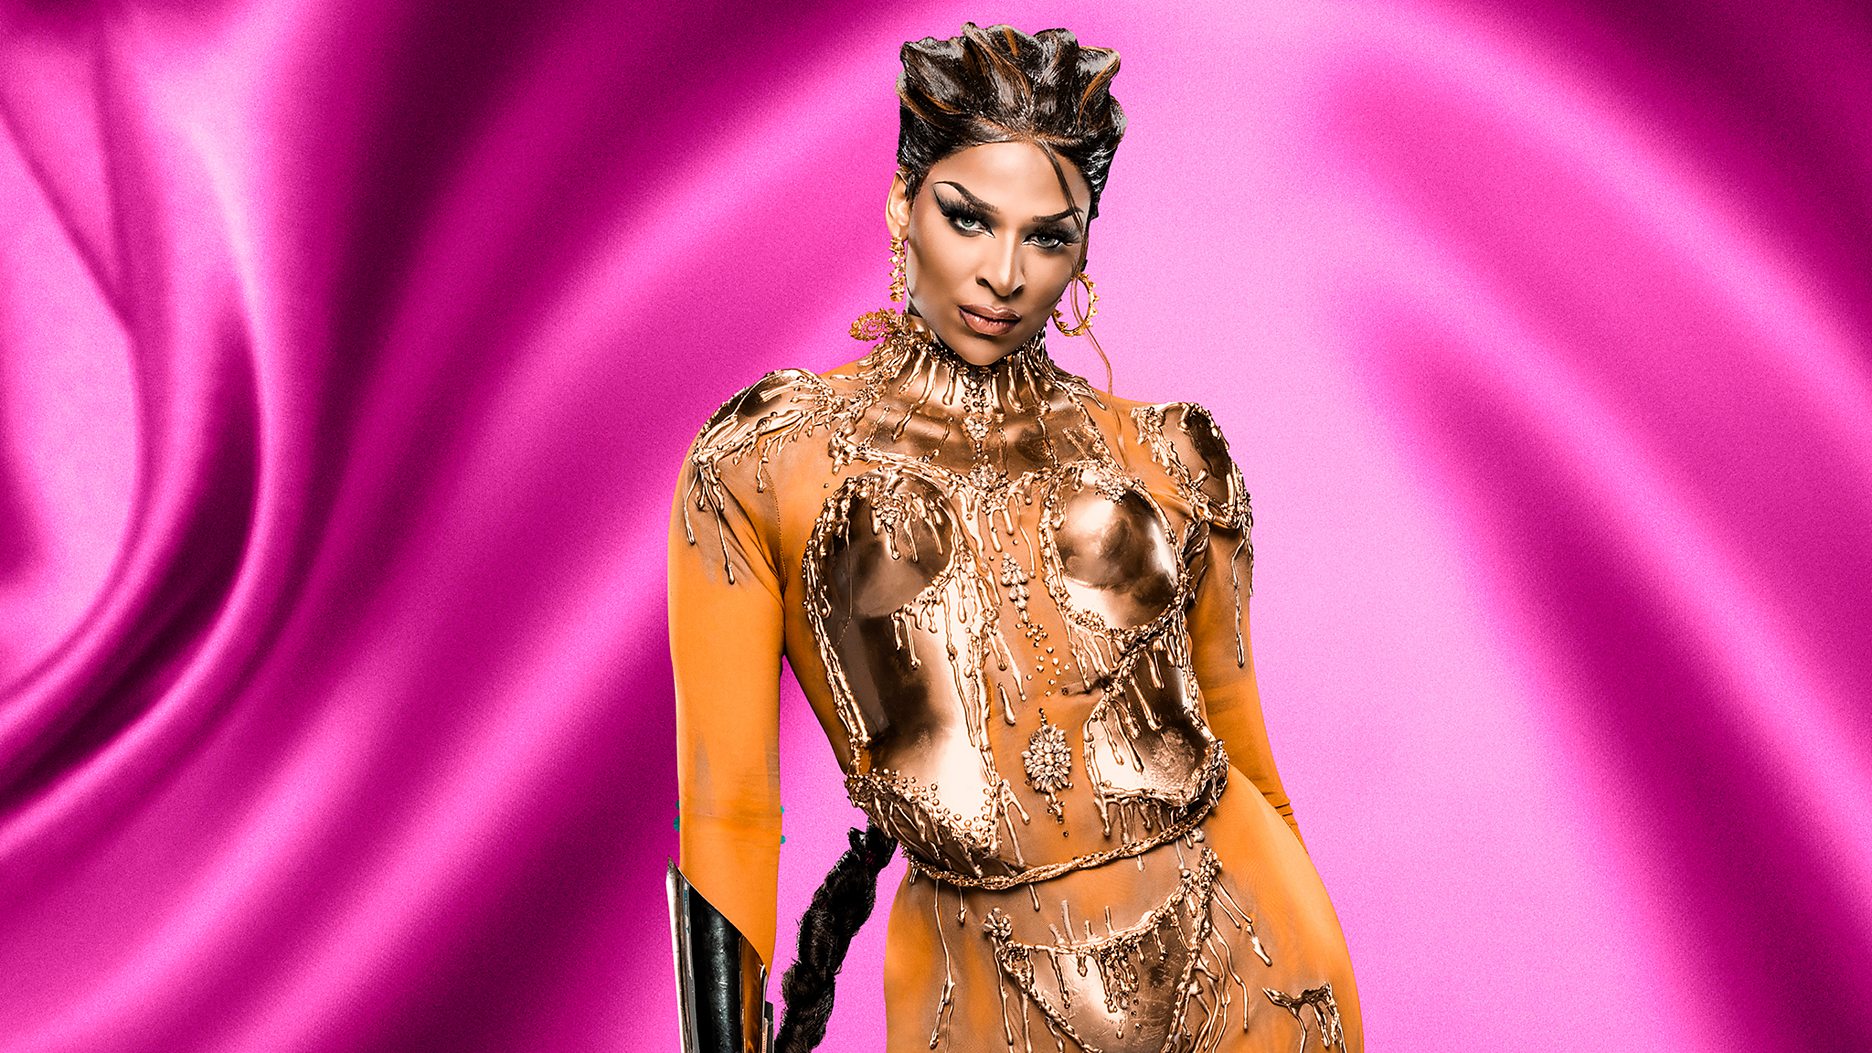 Interview with Cara Melle  - RuPaul’s Drag Race UK 2023 contestant